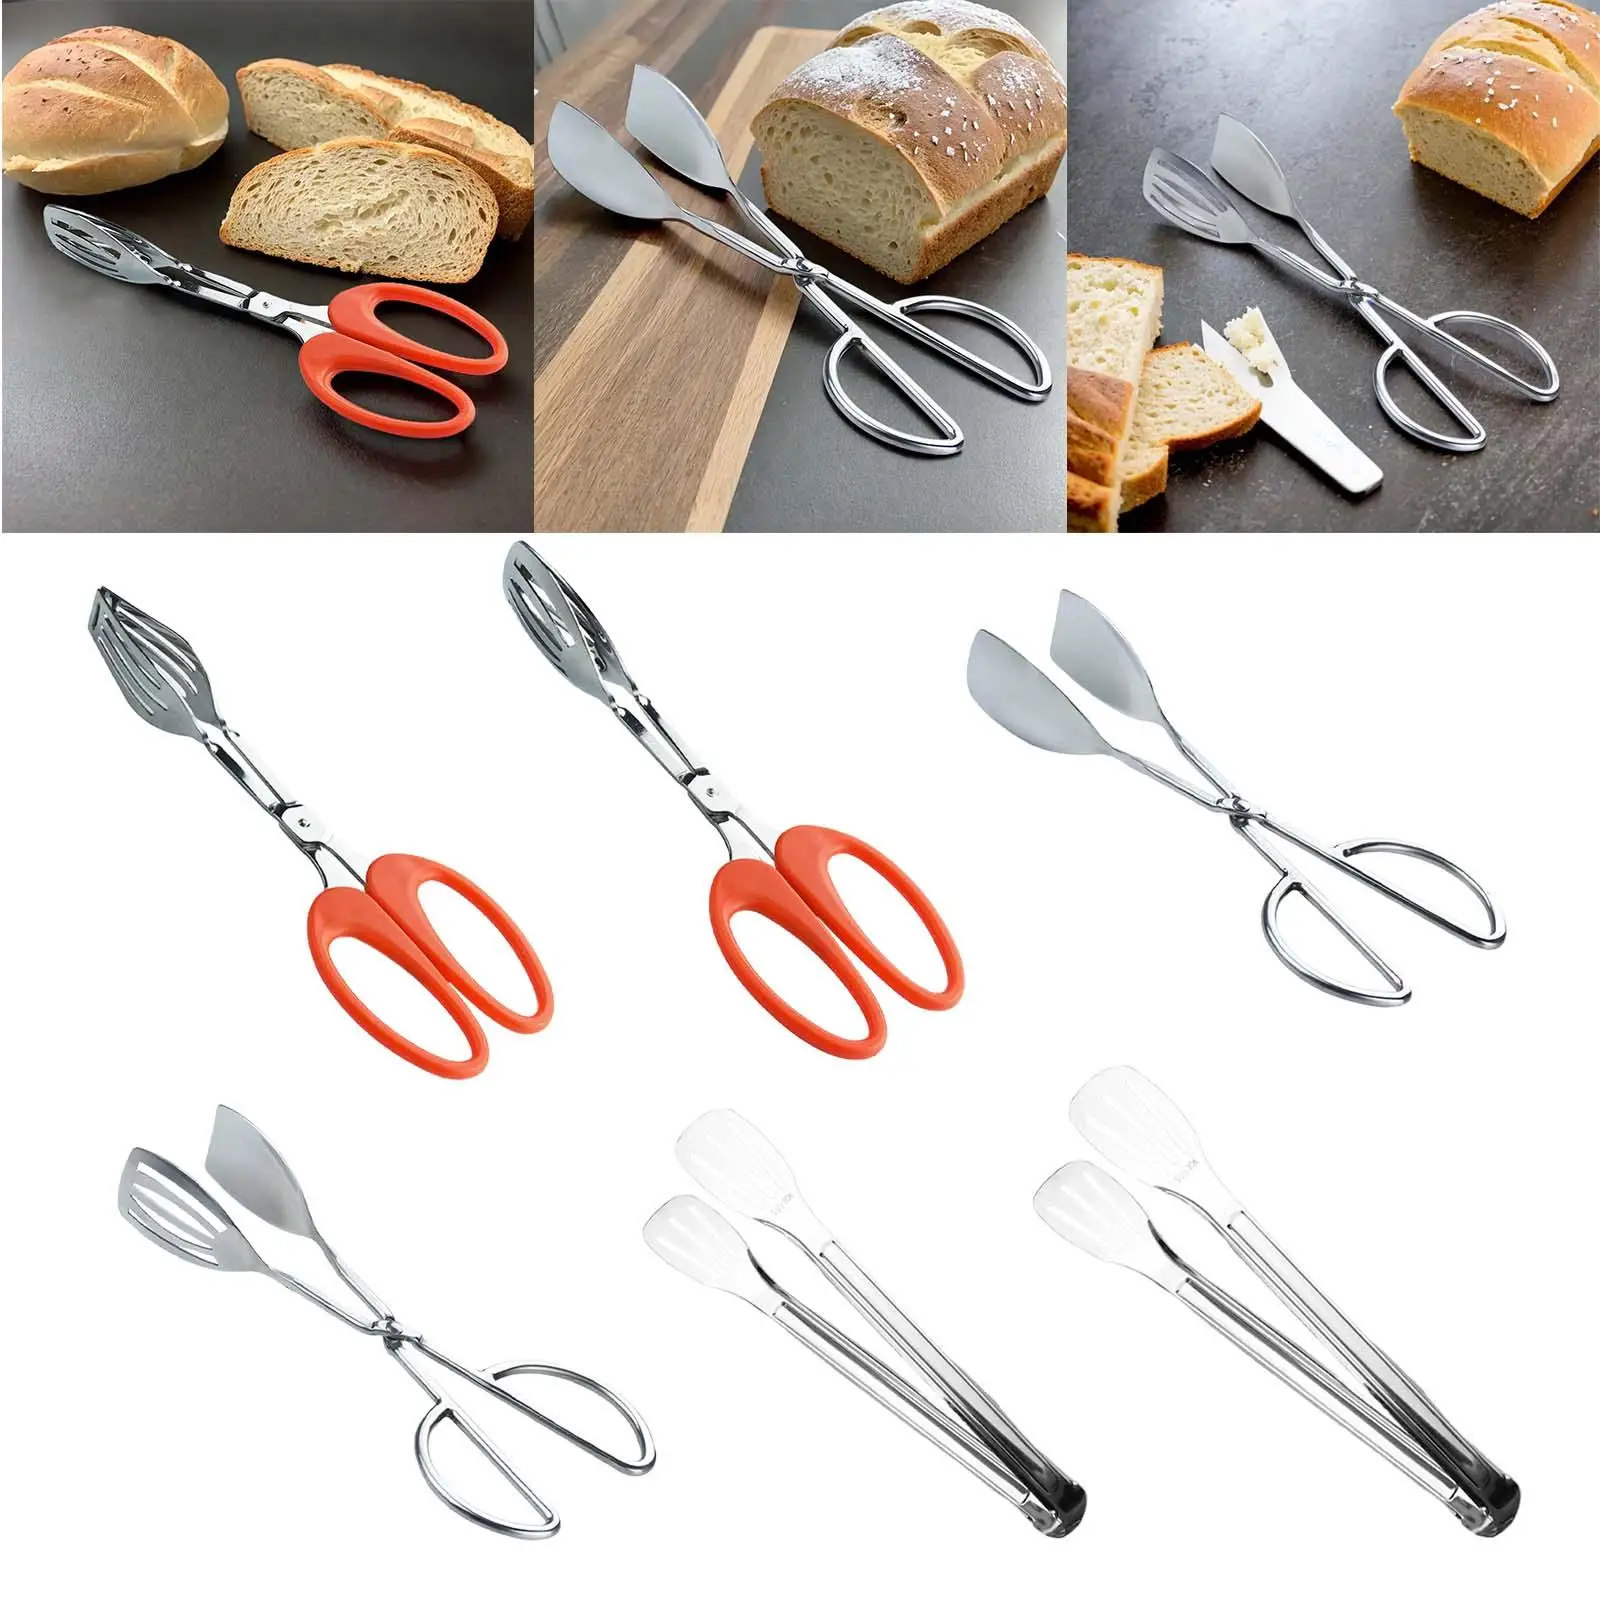 Kitchen Tongs Buffet Party Catering Serving Tongs Steak Clamps Household Cooking Tongs for Baking BBQ Grilling Barbecue Frying